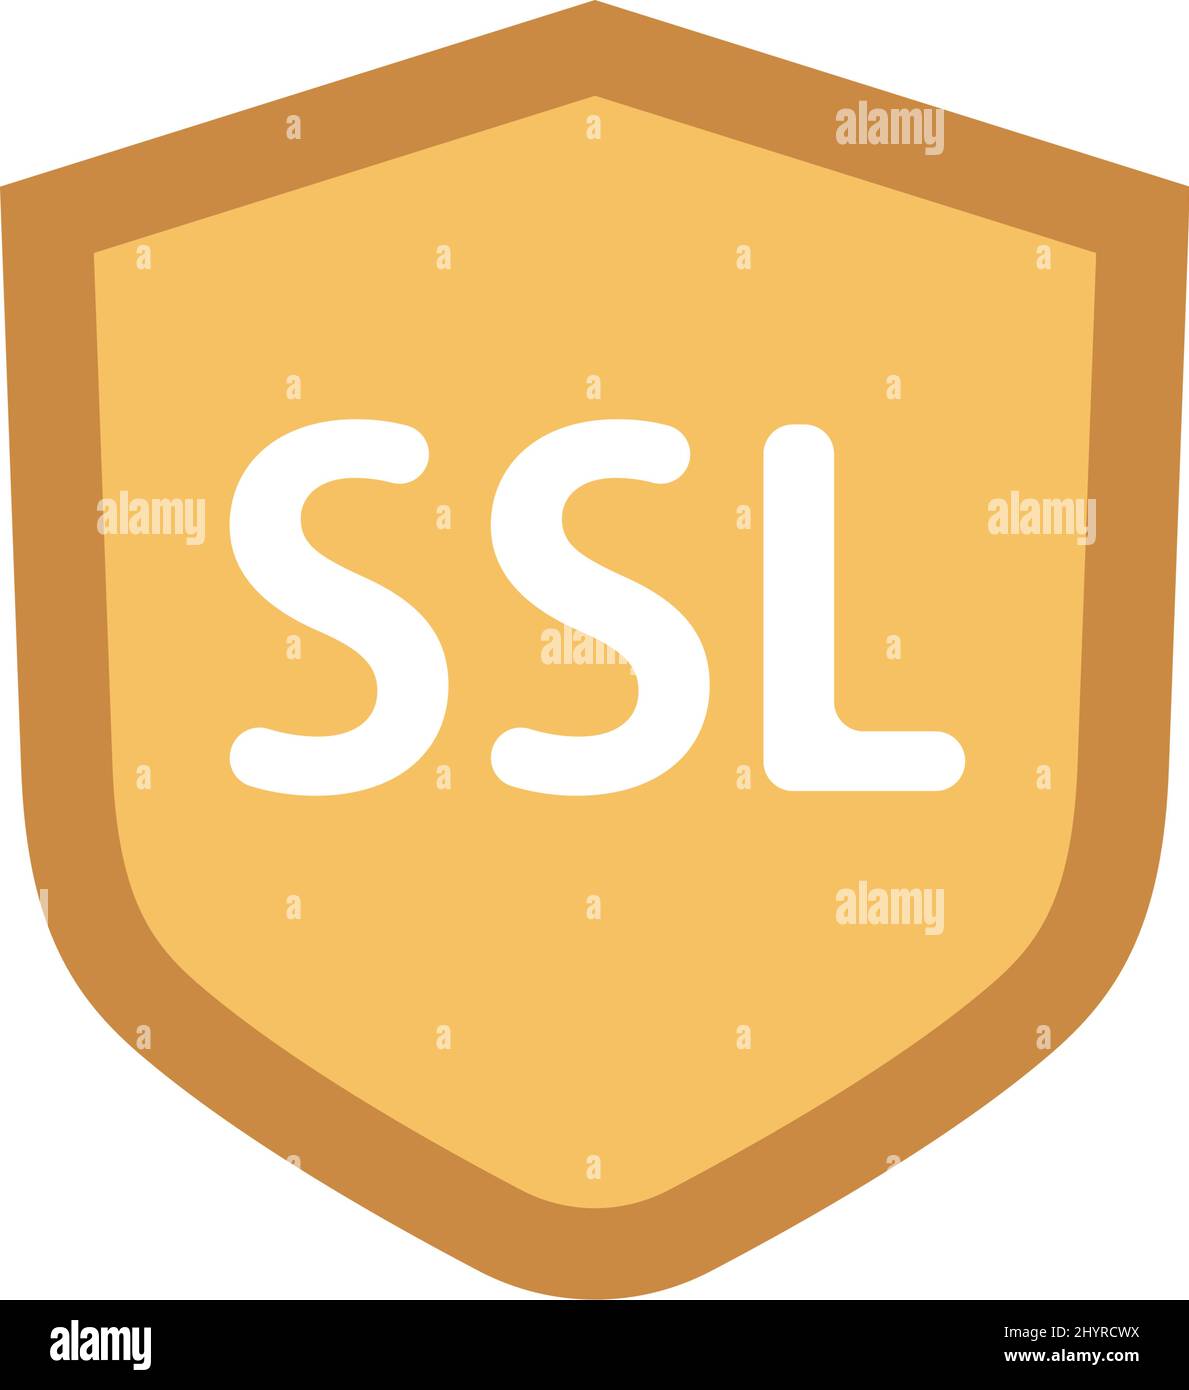 Shield icon with SSL written on it. Security icon. Editable vector. Stock Vector